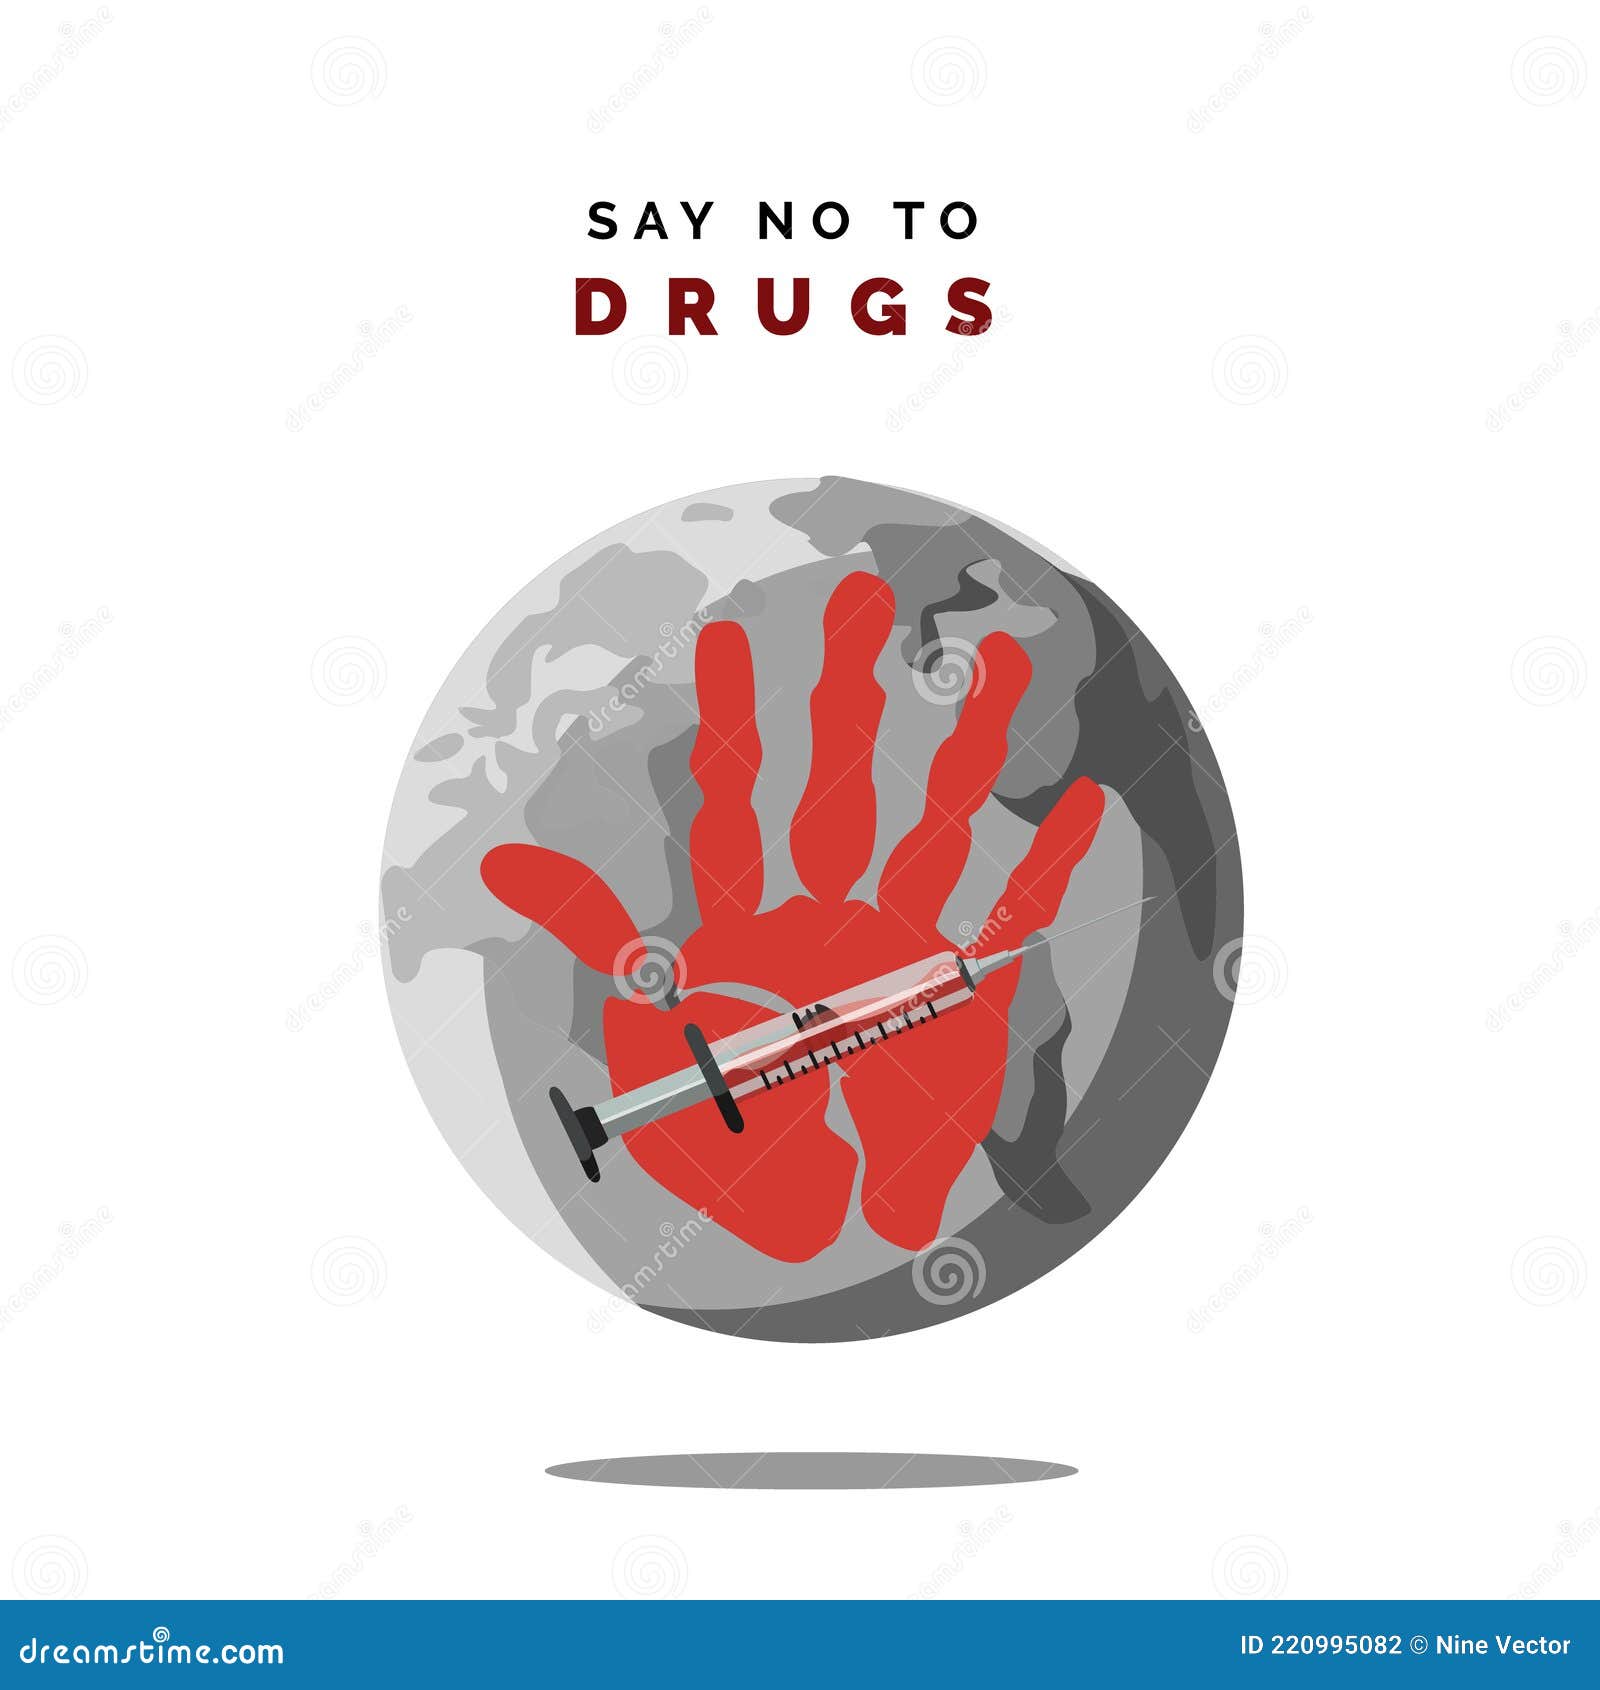 Details more than 146 say no to drugs drawing latest